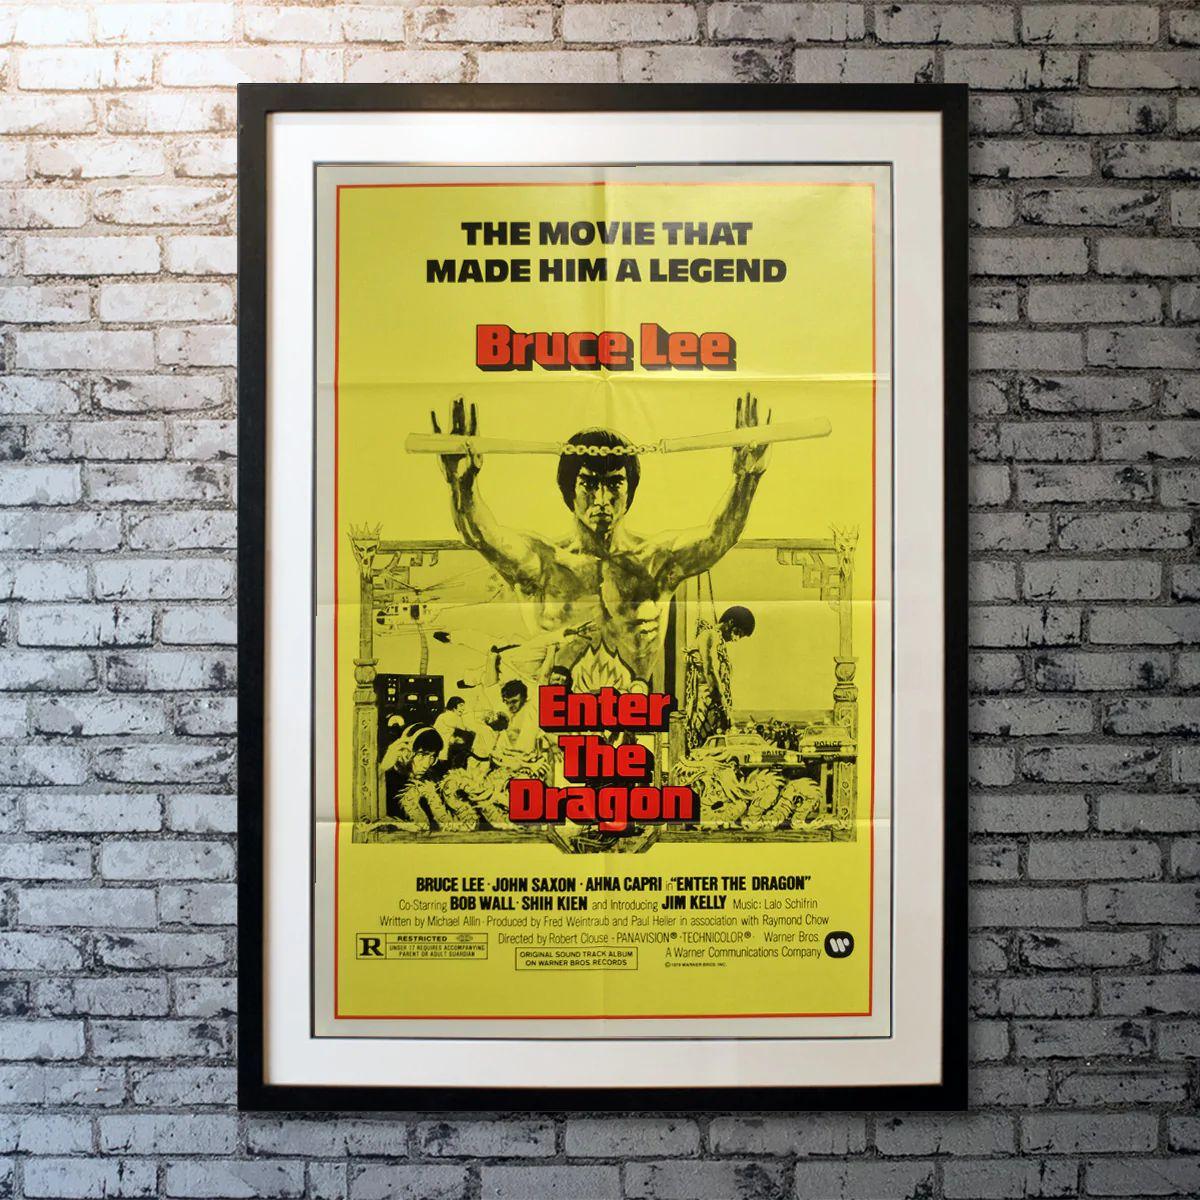 Enter The Dragon, Unframed Poster, 1979r

A secret agent comes to an opium lord's island fortress with other fighters for a martial-arts tournament.

Year: 1979
Nationality: United States
Condition: Folded
Type: Original One Sheet
Size: 27 X